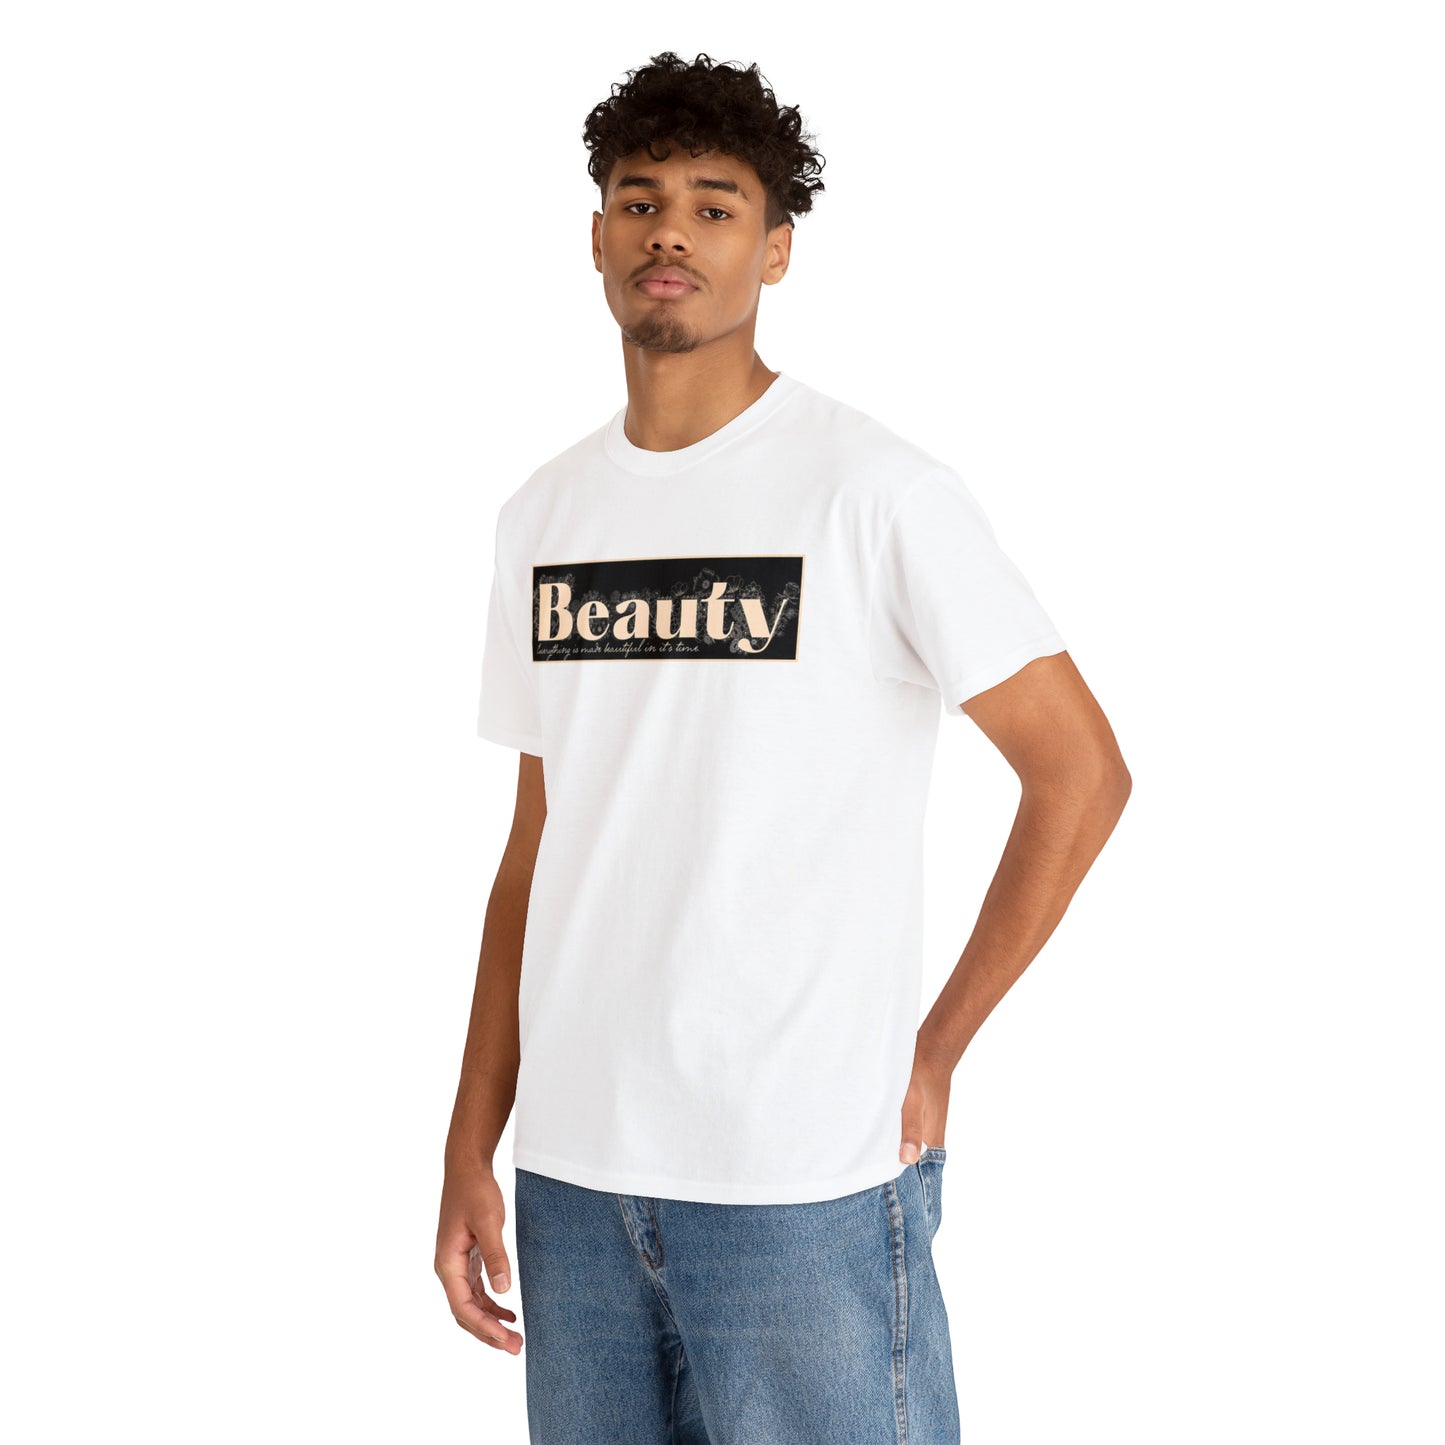 "Beauty" Cotton Graphic Tee - Everything Black & Creamed Honey